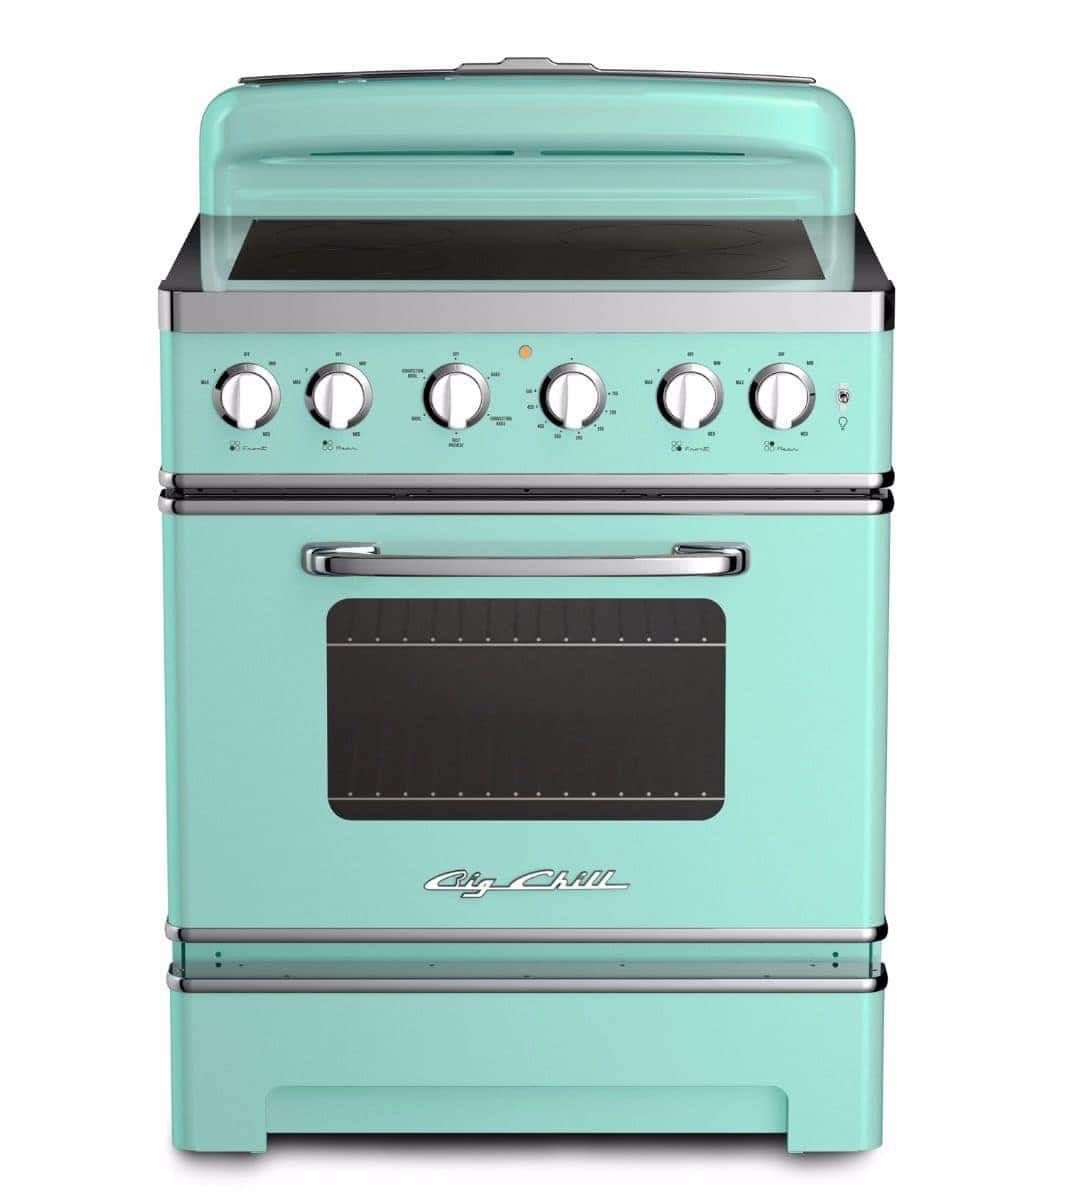 Big Chill Retro Induction Range in Turquoise